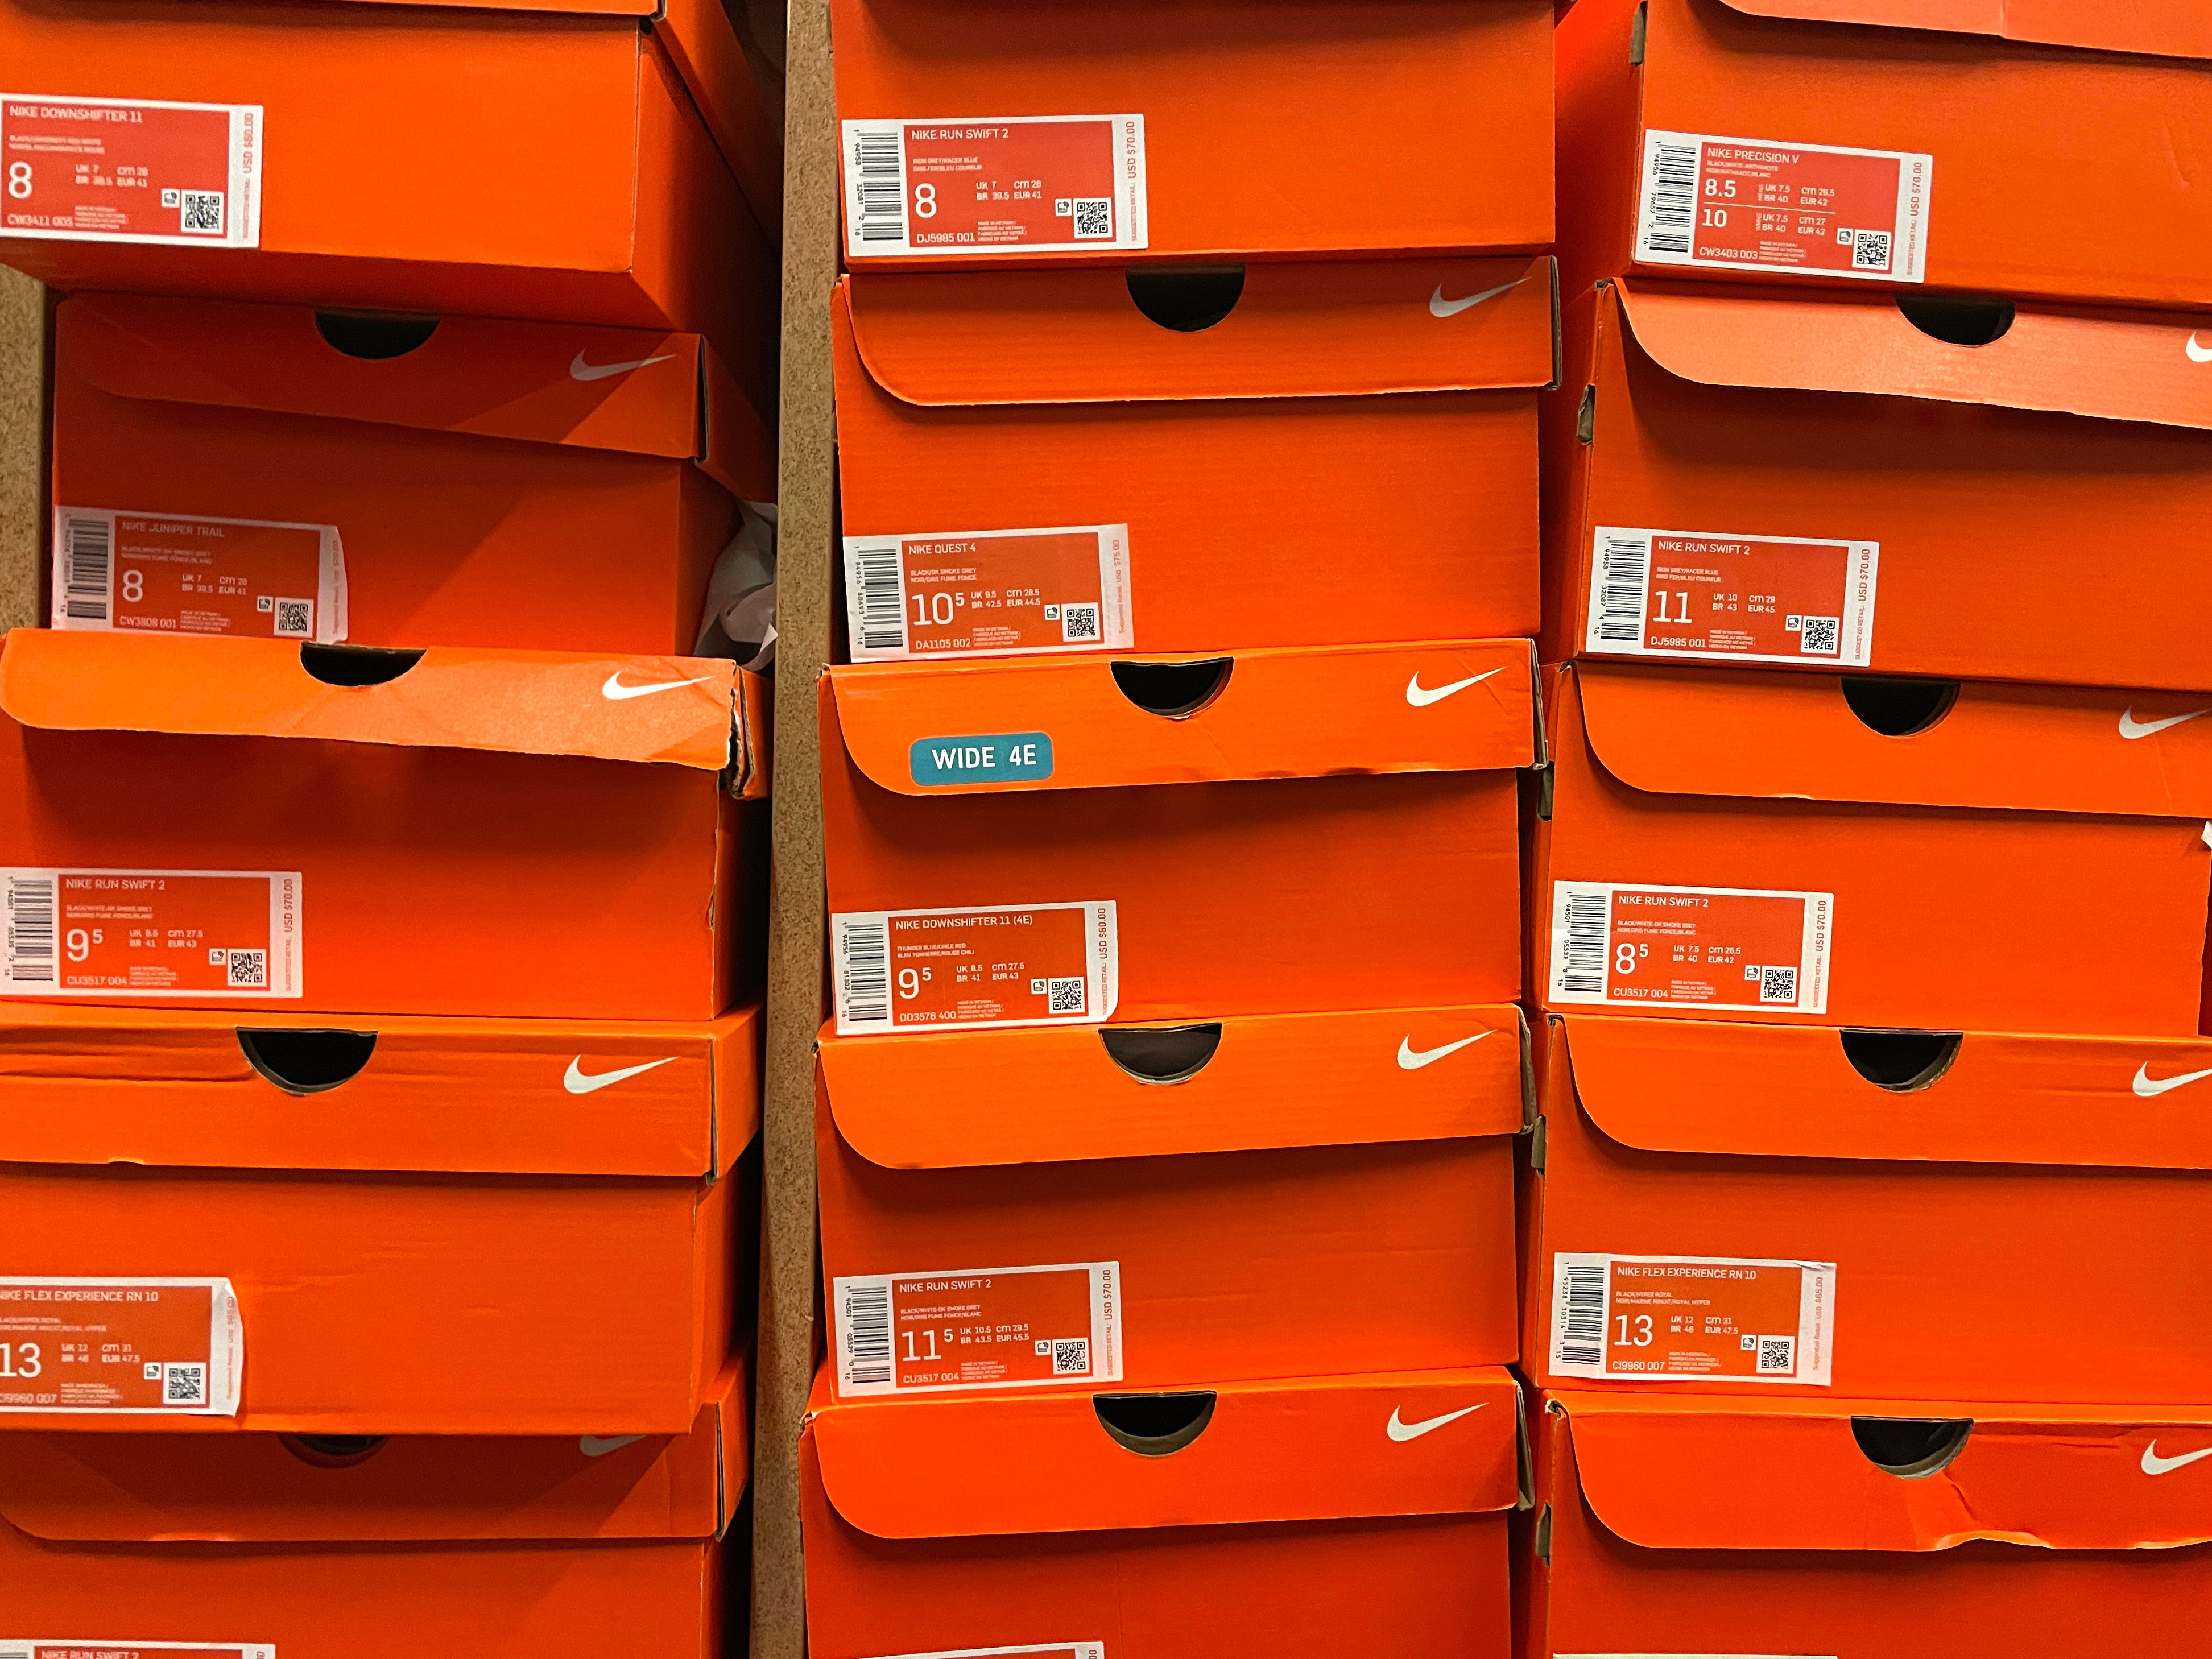 Nike falls to new low after clearing inventory margins (NYSE:NKE) | Seeking Alpha